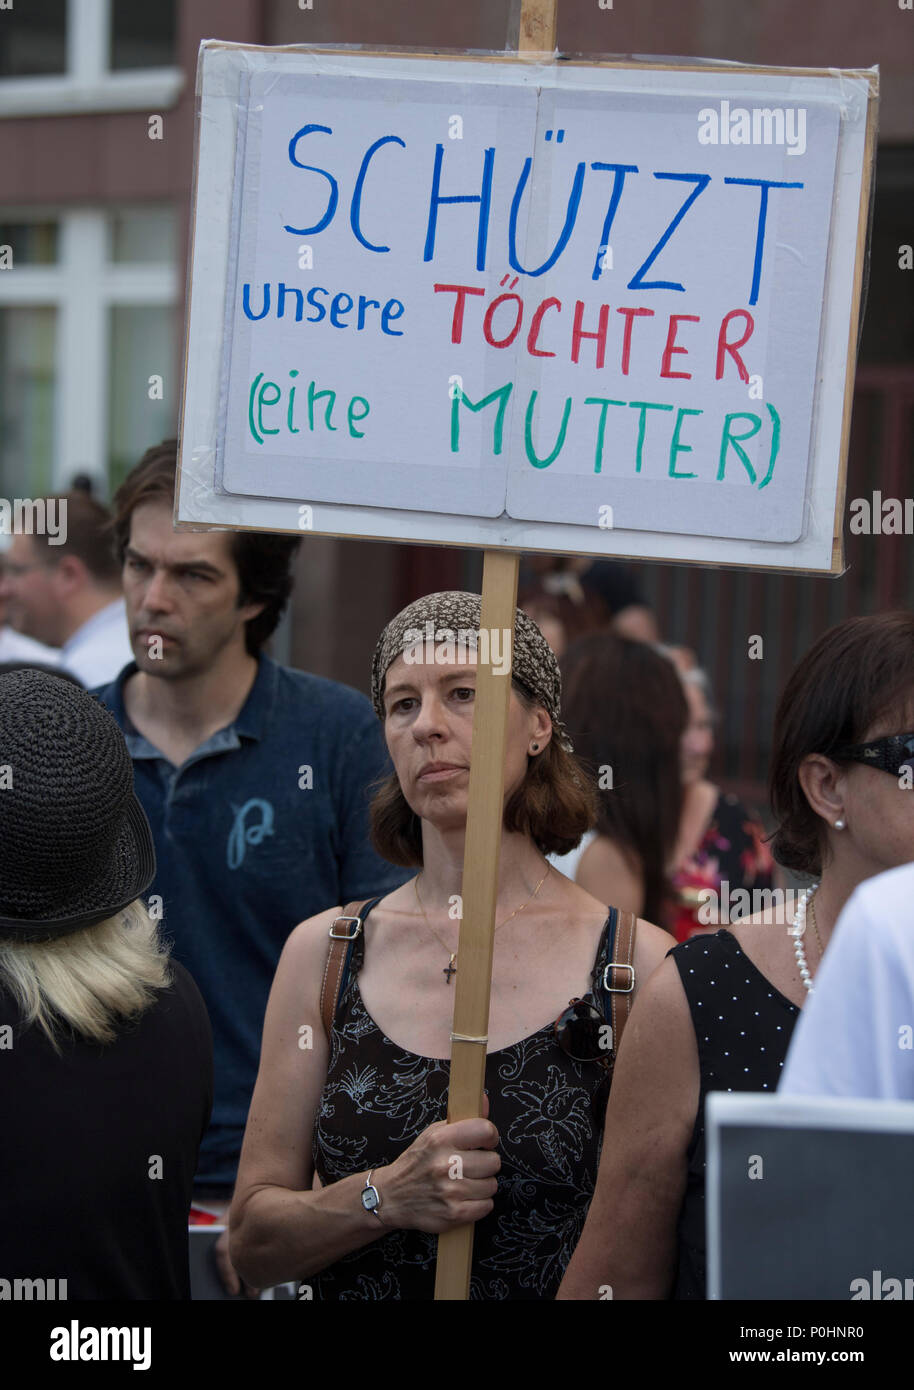 09 June 2018, Germany, Mainz: A few dozen people gather at a vigil organised by the Alternative for Germany (AfD) to commemorate 14-year-old murder victim Susanna. A woman carries a sign reading 'Schuetzt unsere Toechter (eine Mutter)' (lit. 'Protect our daughters (from a mother)'). An Iraqi refugee is suspected of having raped and murdered the girl. Photo: Boris Roessler/dpa Stock Photo